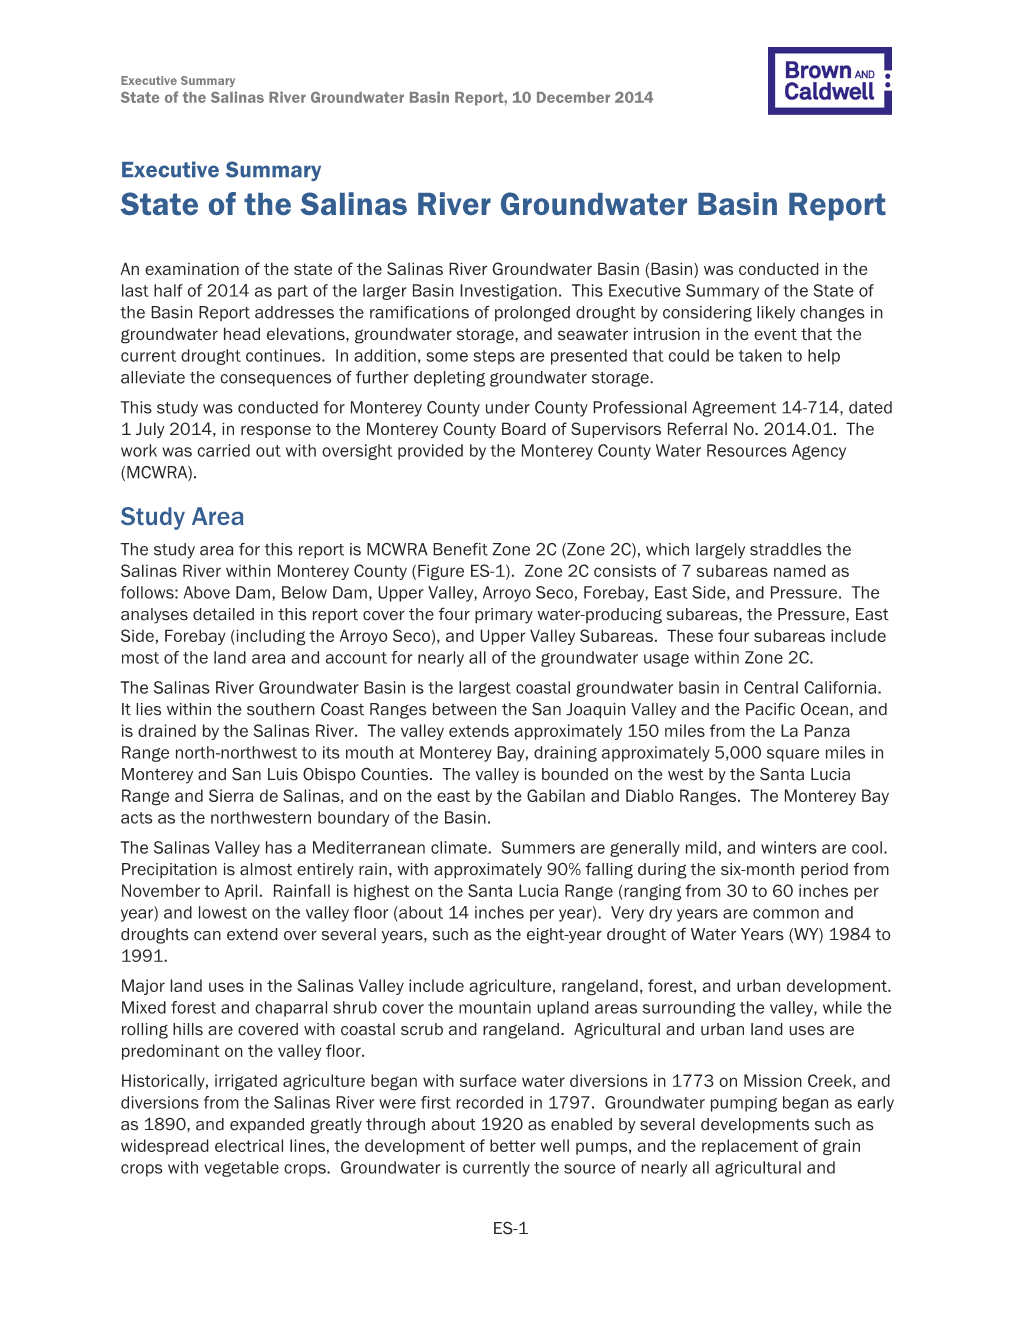 State of the Salinas River Groundwater Basin Report, 10 December 2014